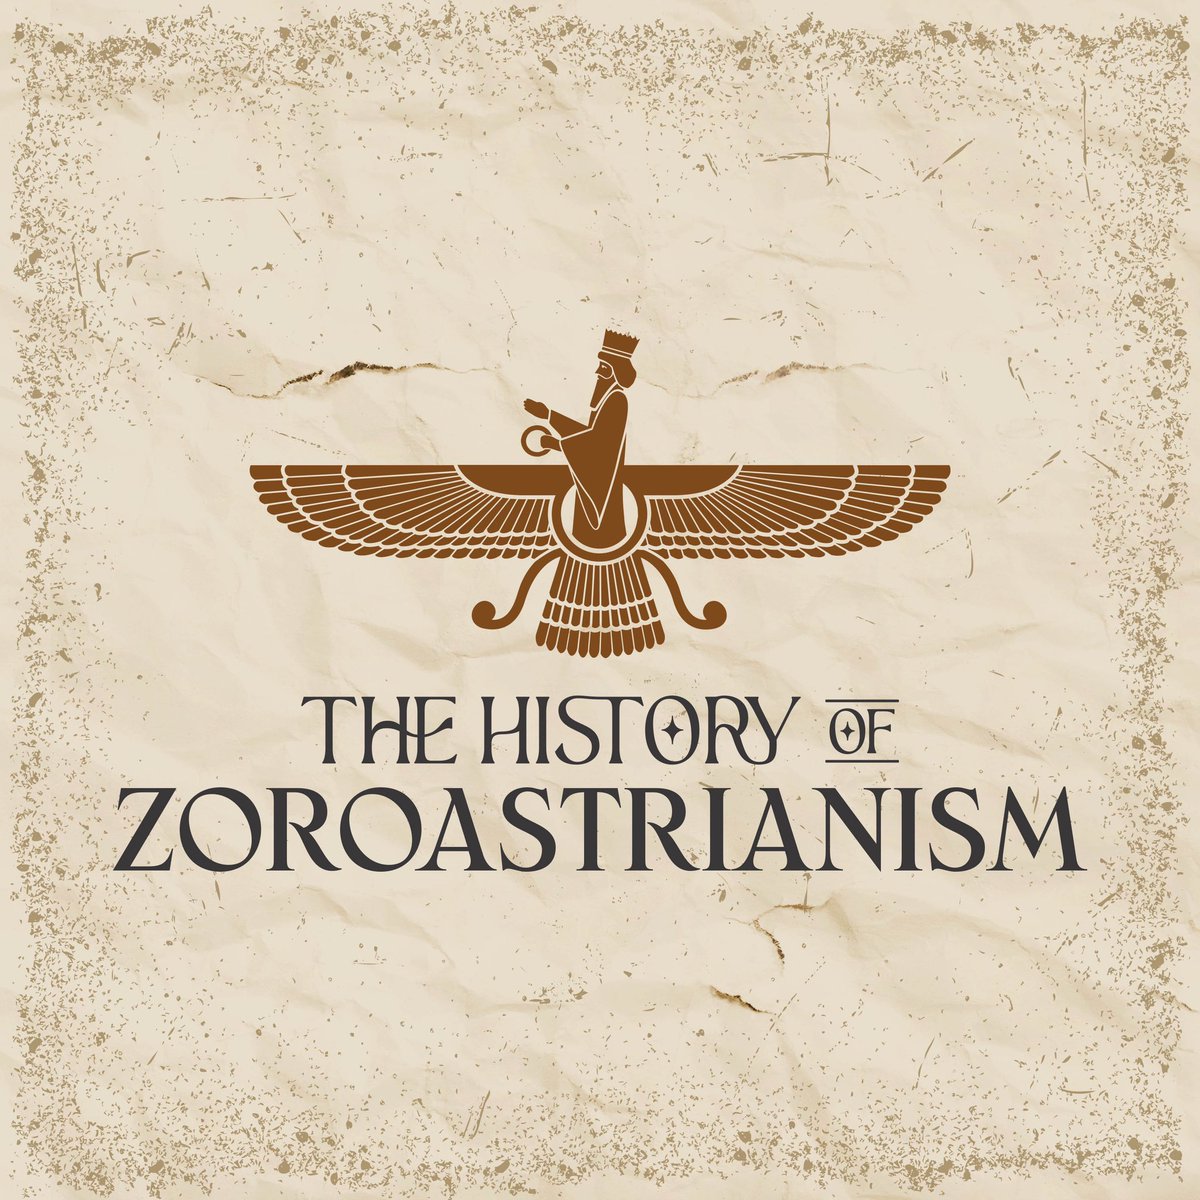 Ever want to learn more about the Religion that dominated the Middle East for a millennia? The first Prophet. The first Monotheistic religion. Come along as I cover Zoroastrianism from it’s inception to it’s eventual collapse on the world stage. Coming this June.